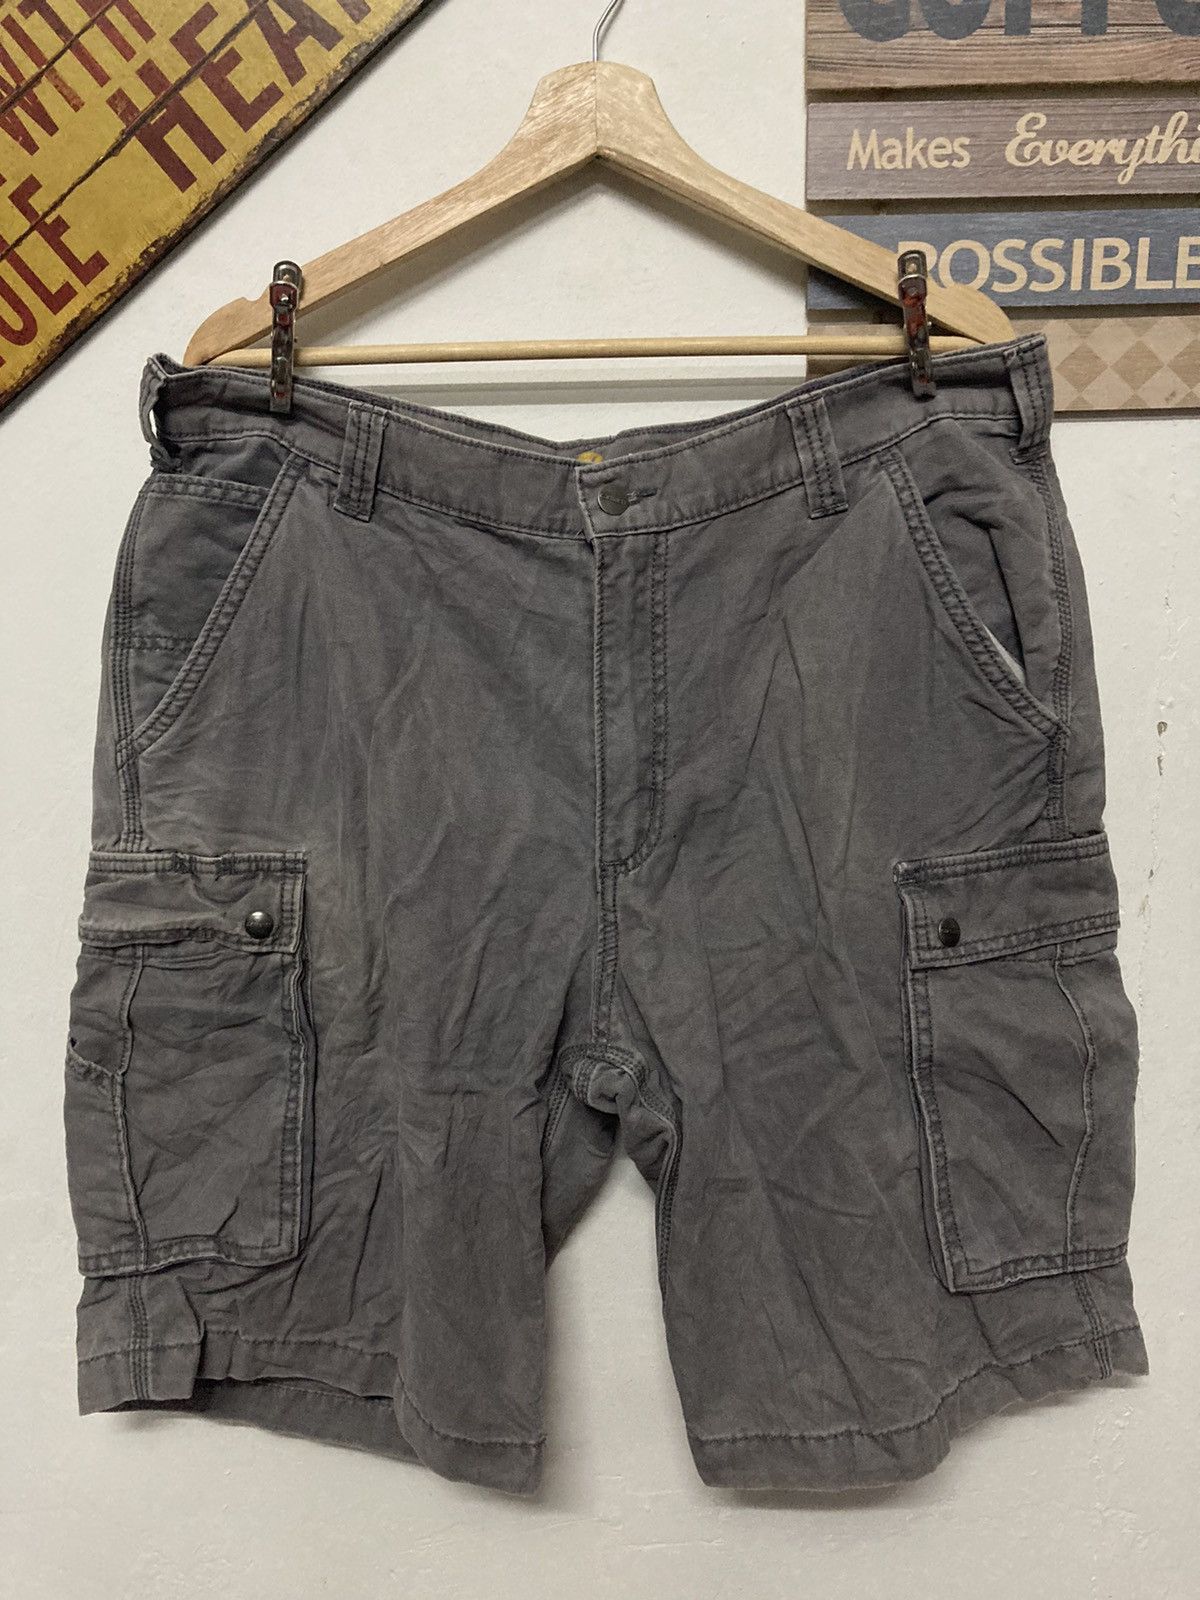 Vintage - Carhatt Relaxed Fit Cargo Short Pant Size 38 - 1